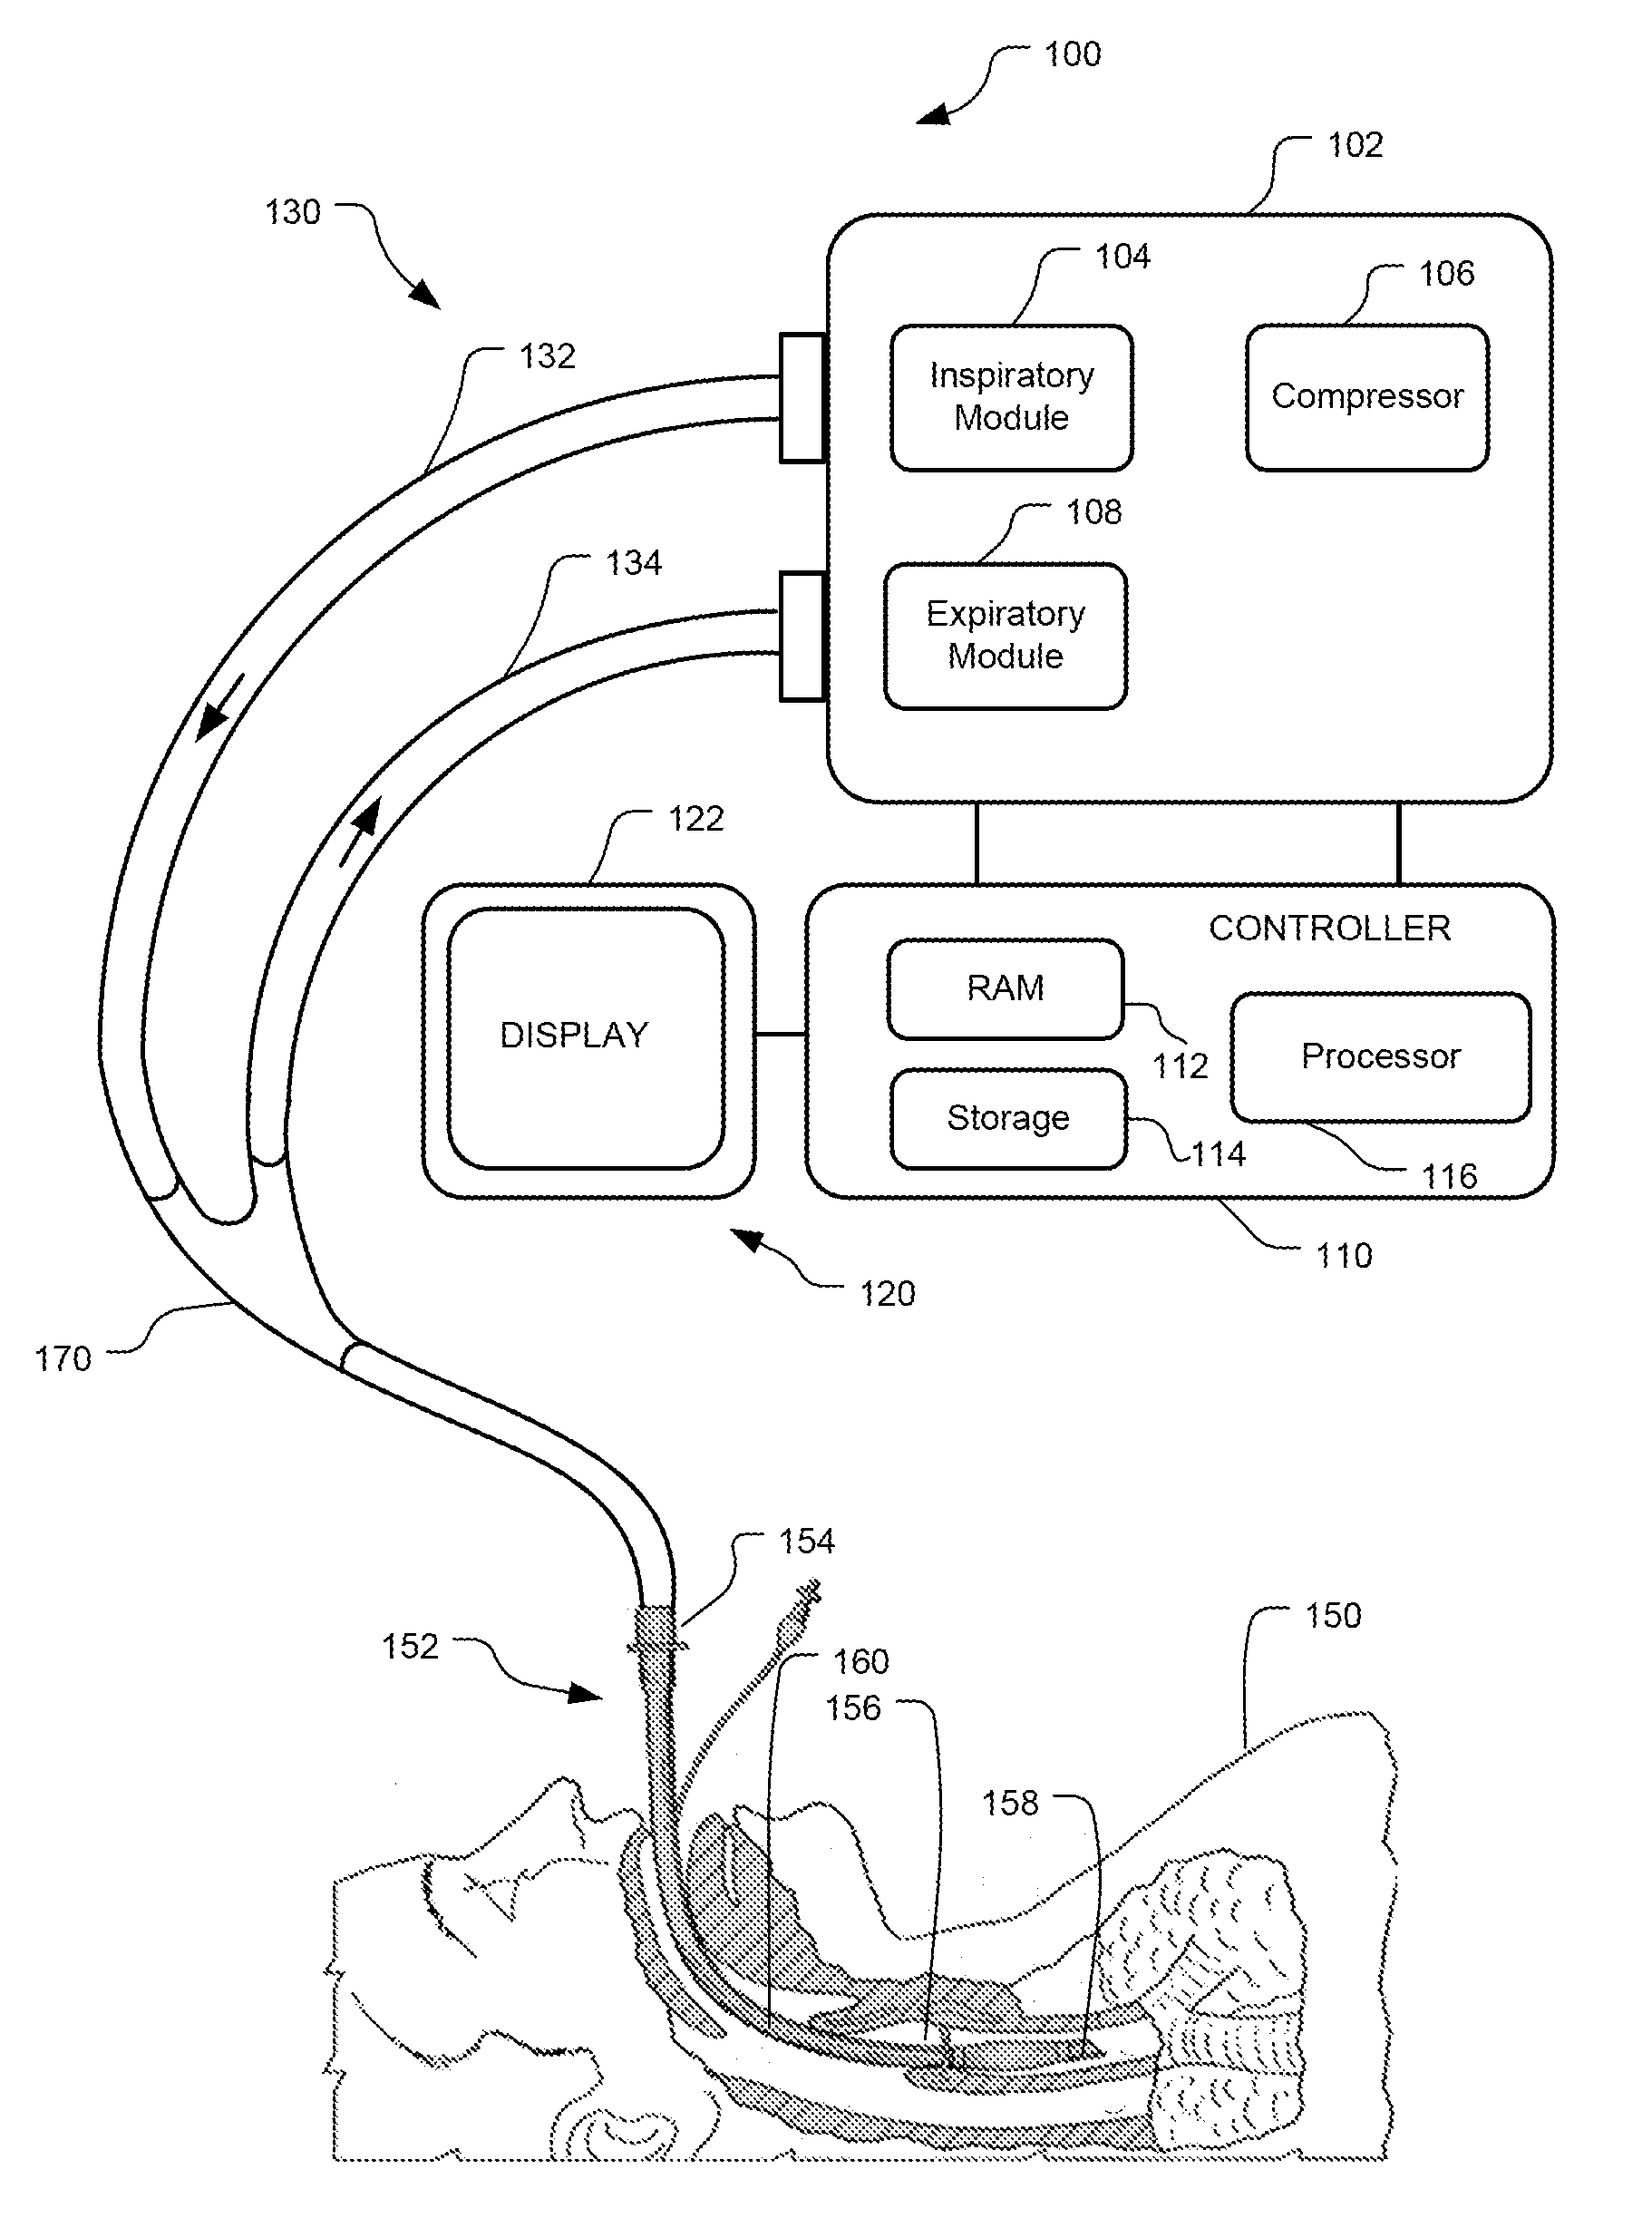 Method And System For Providing A Graphical User Interface For Delivering A Low Flow Recruitment Maneuver